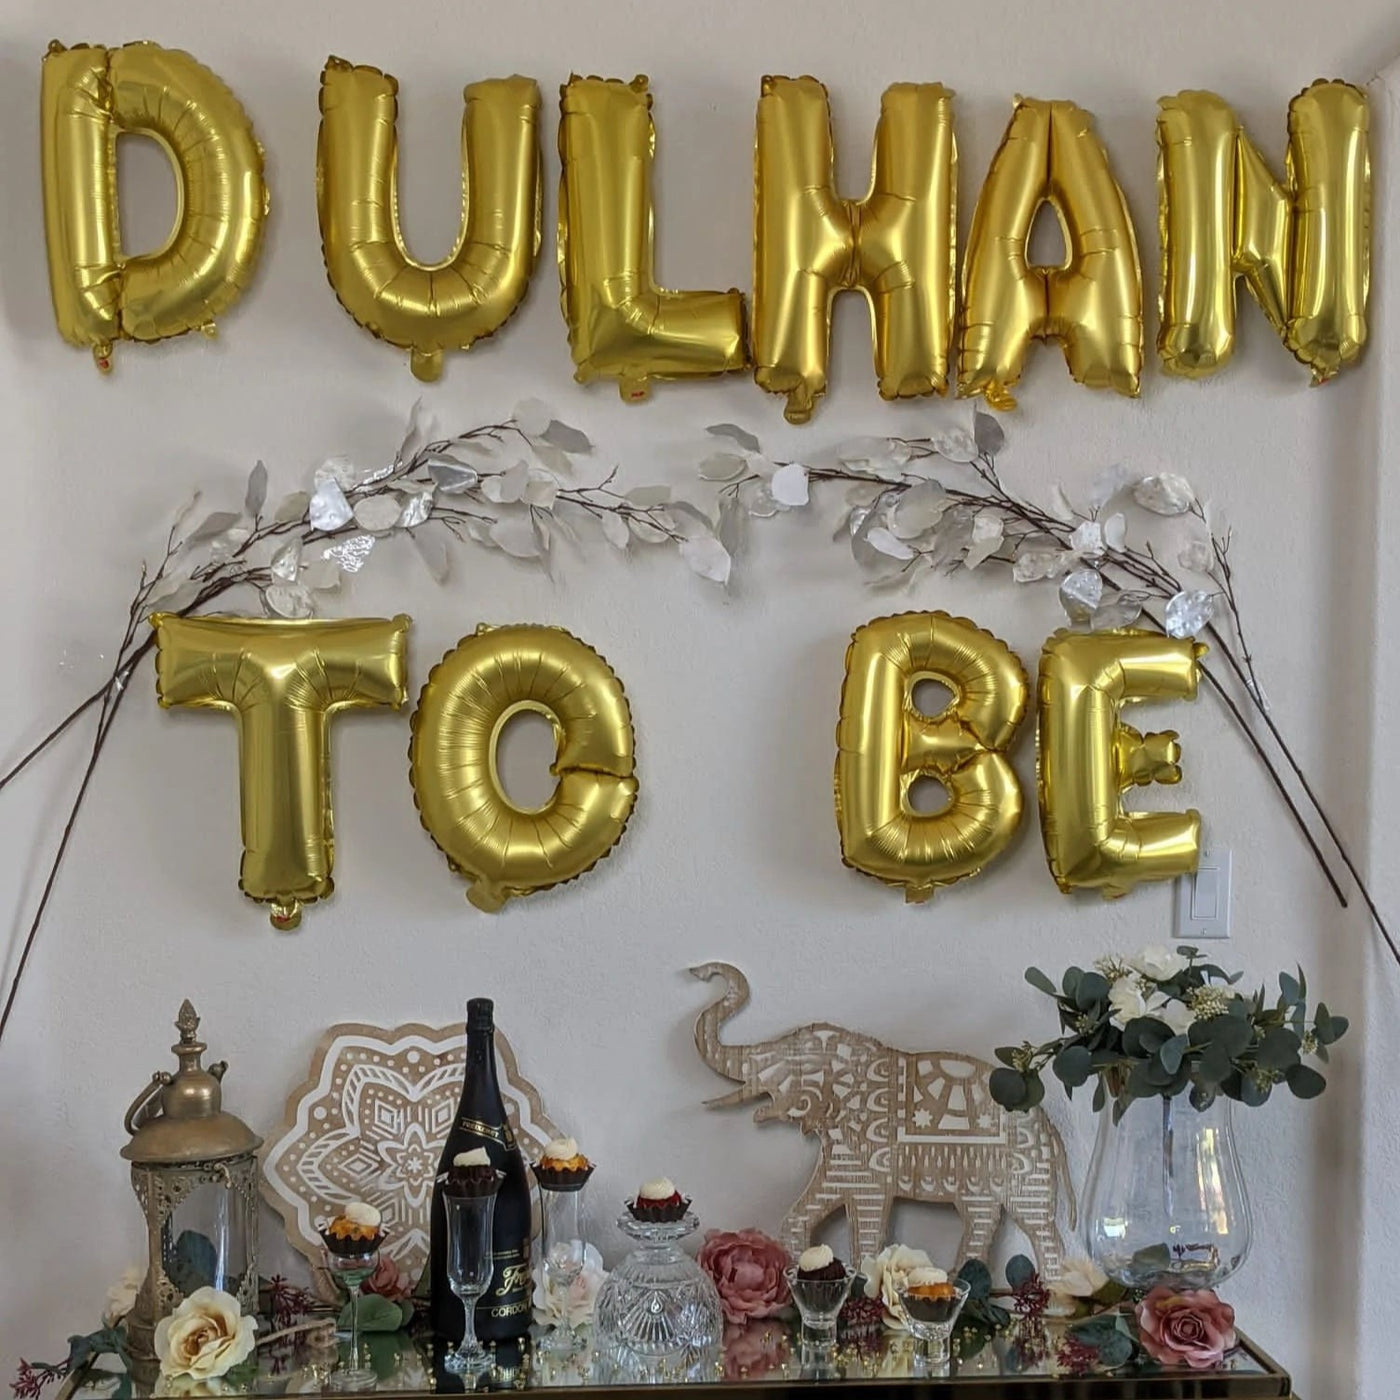 Dulhan To Be Letter Ballons by Modern Desi